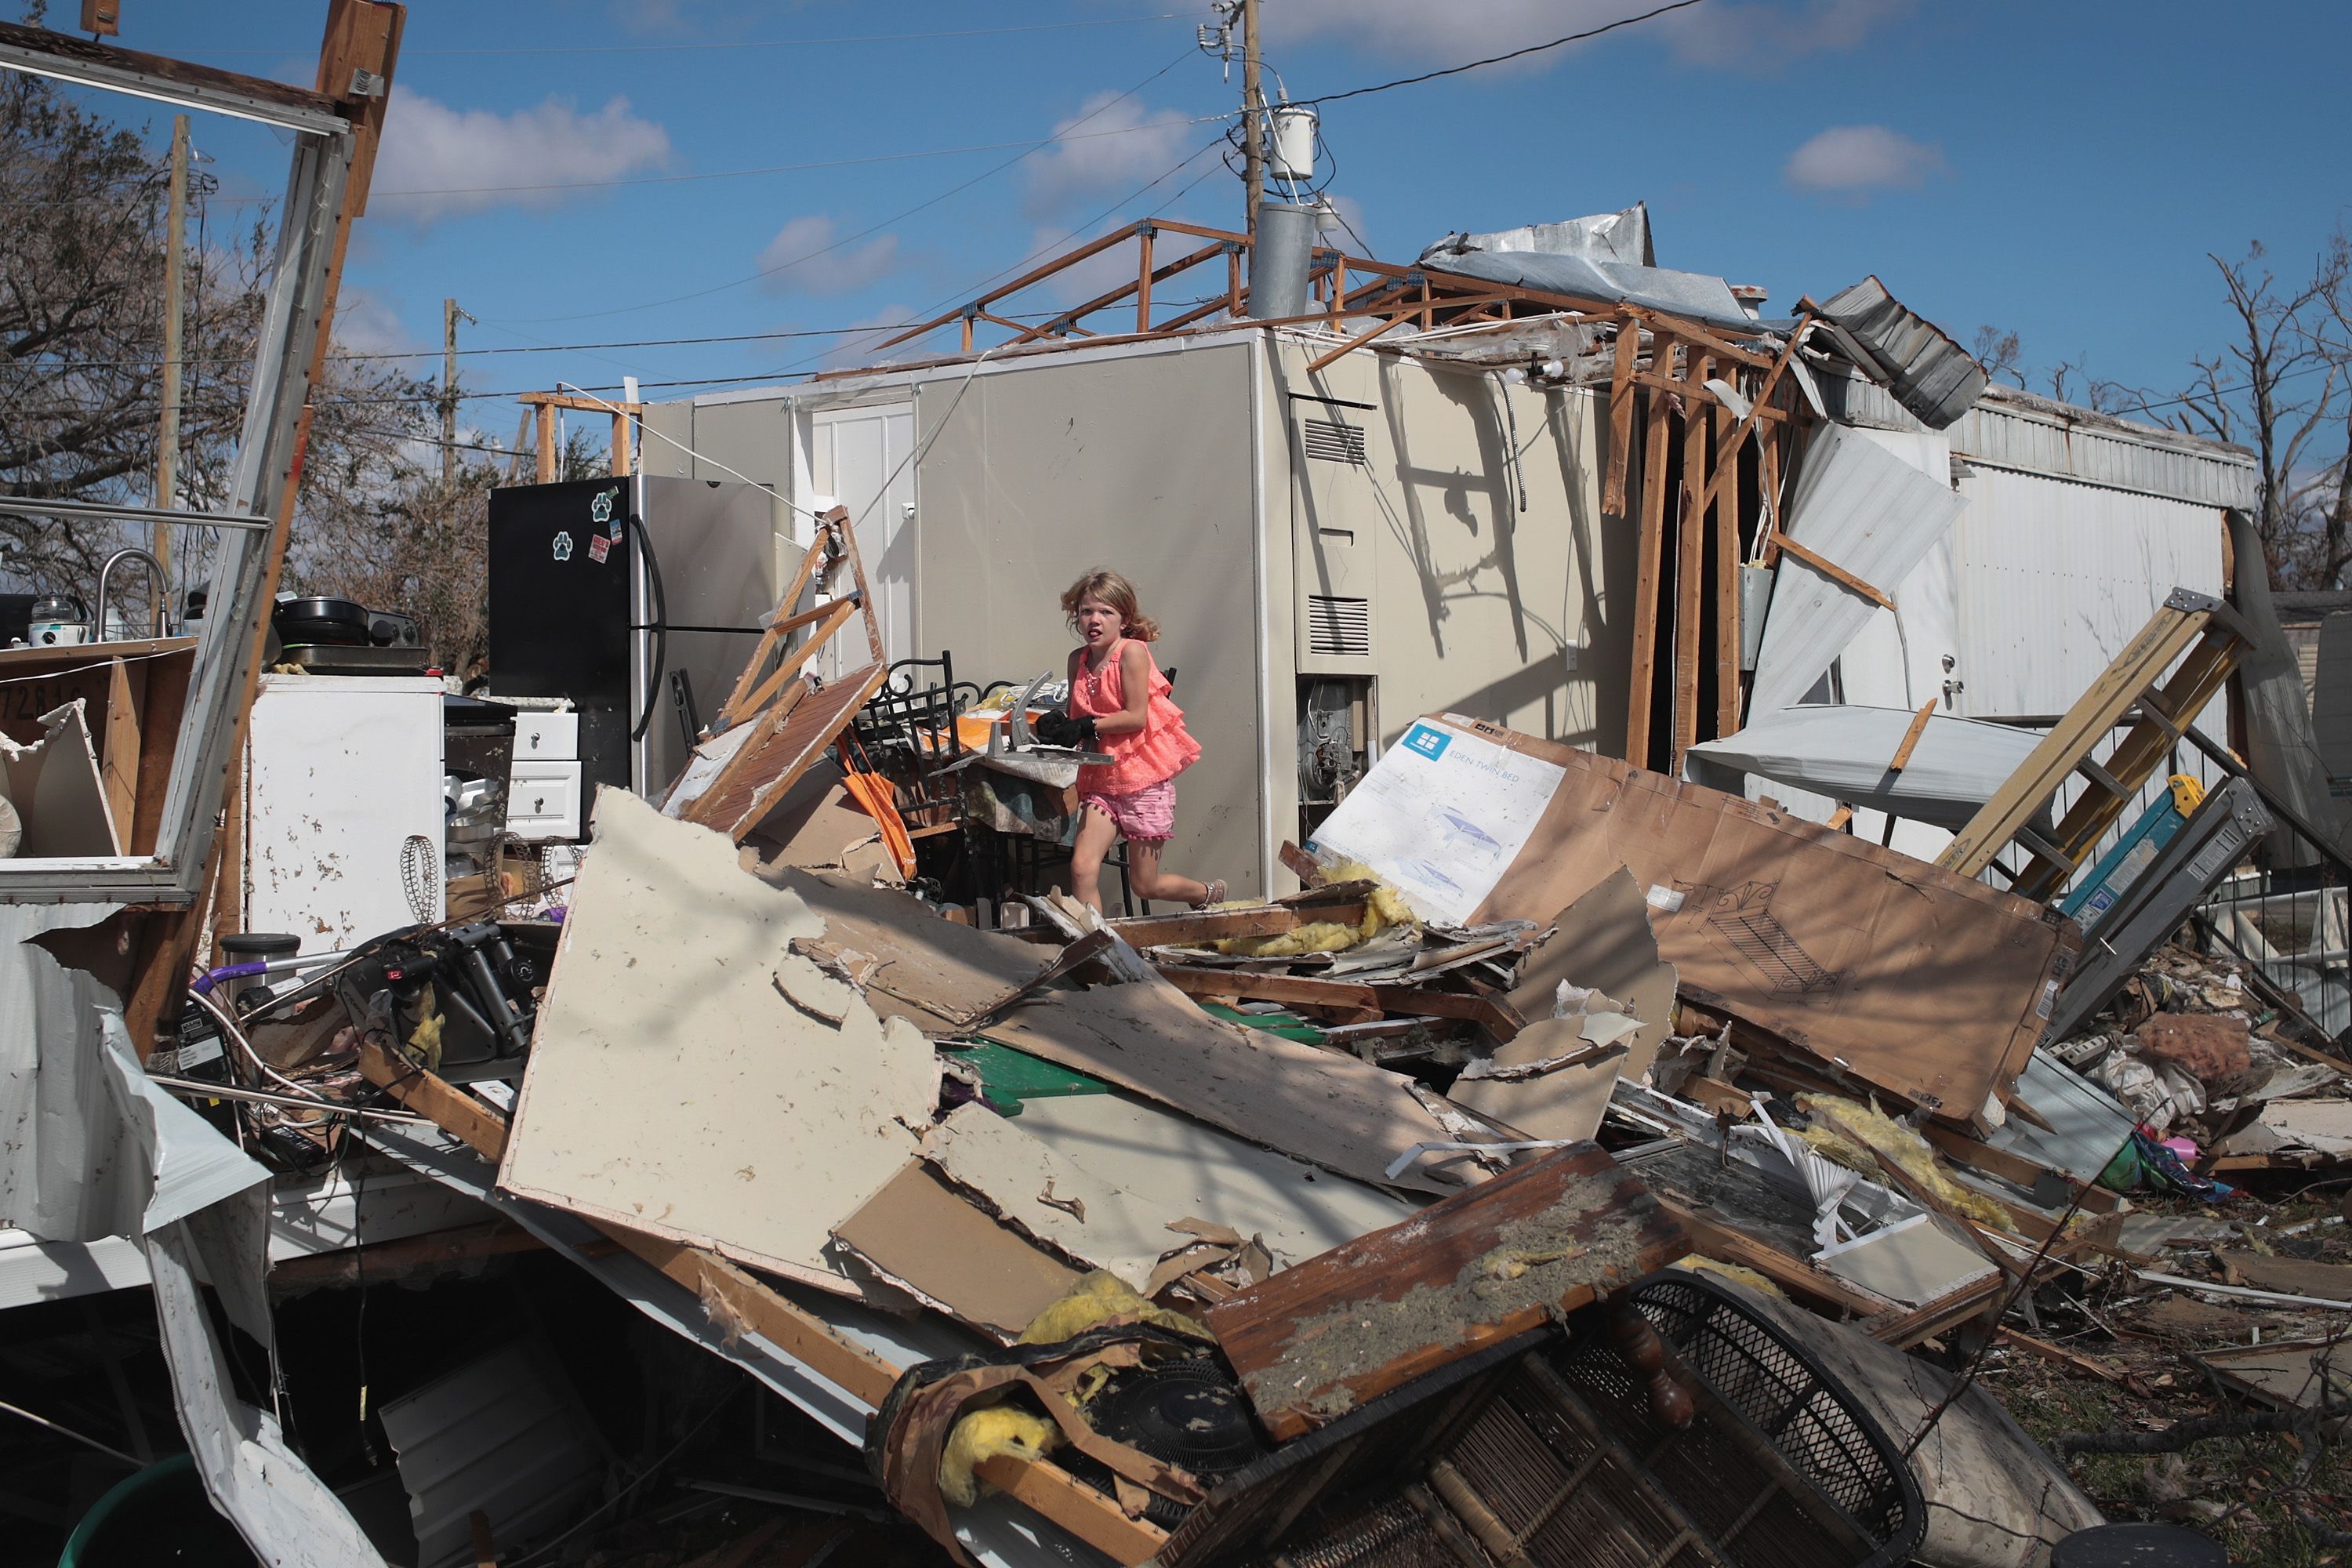 Nine-year-old Jazzmyne Brock helps her mother and grandmother salvage items from a friend's trailer after it was destroyed by Hurricane Michael.